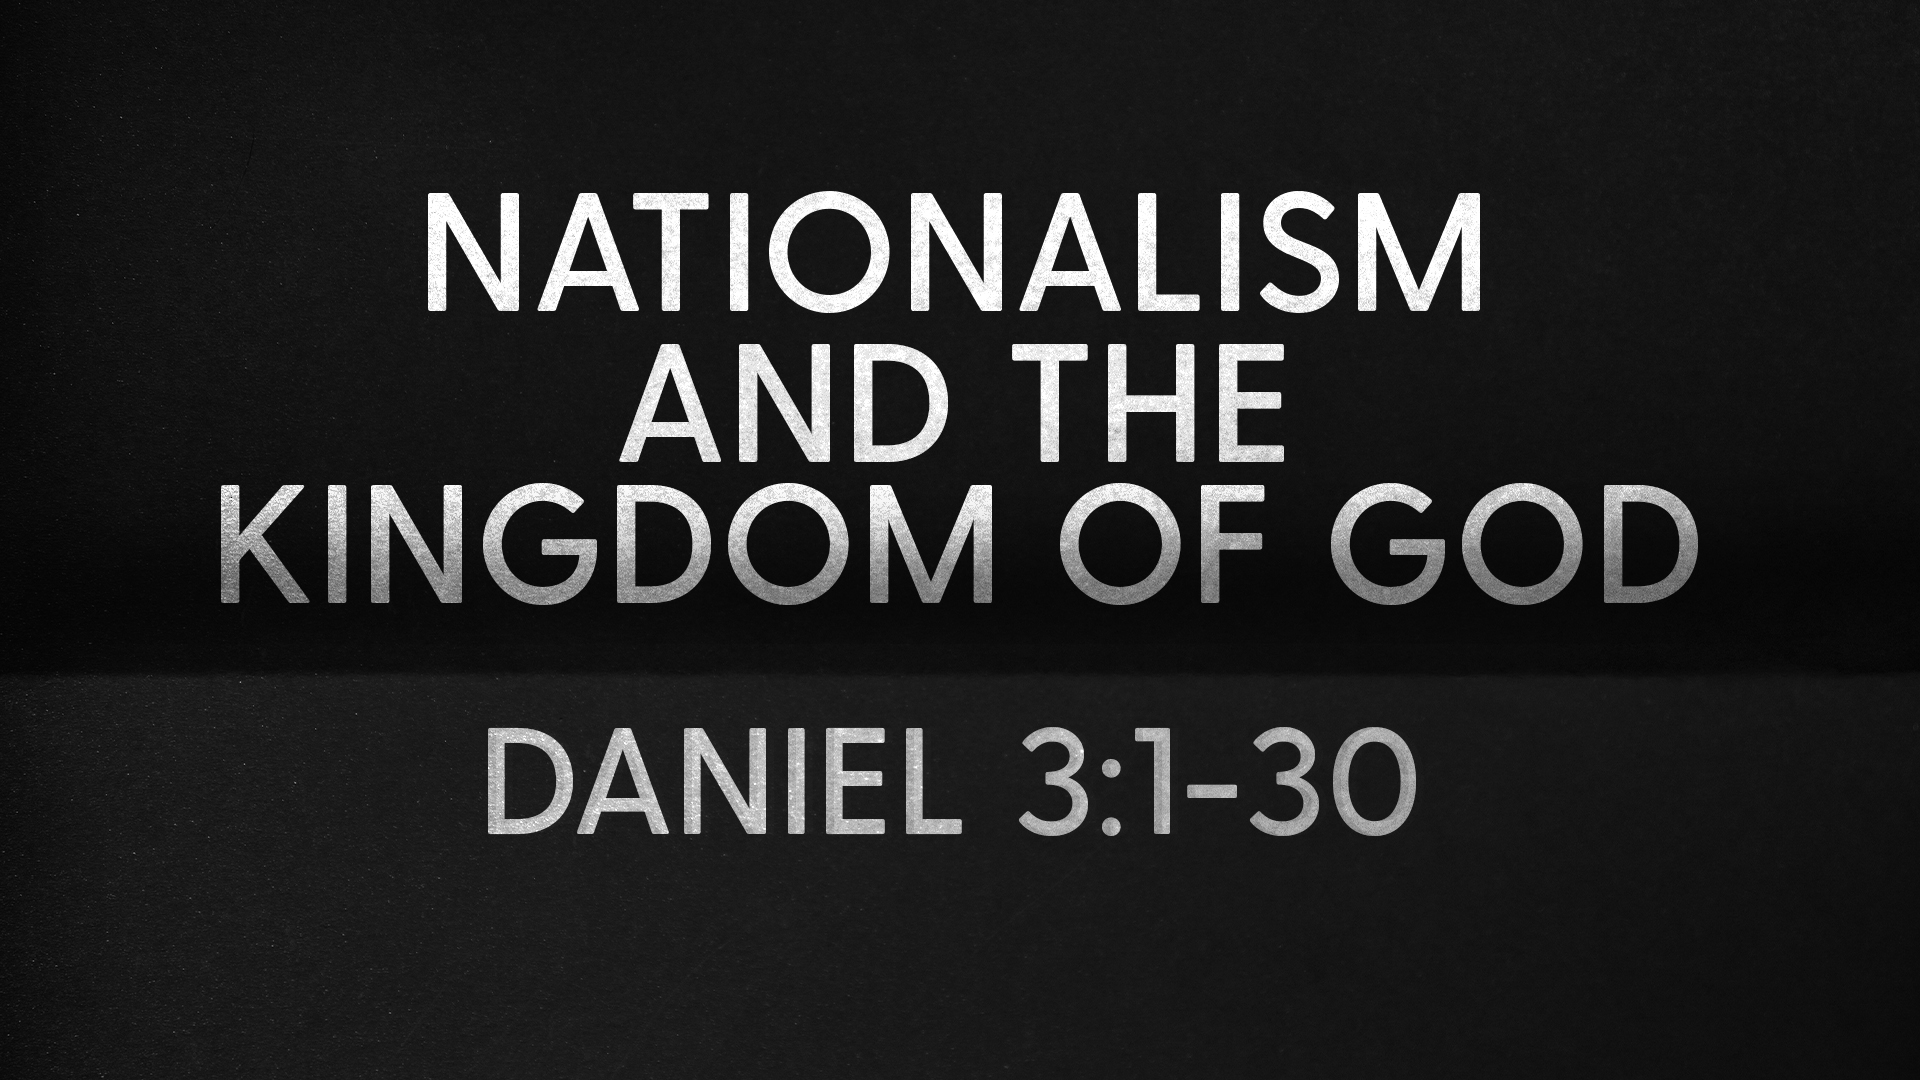 Nationalism and the Kingdom of God